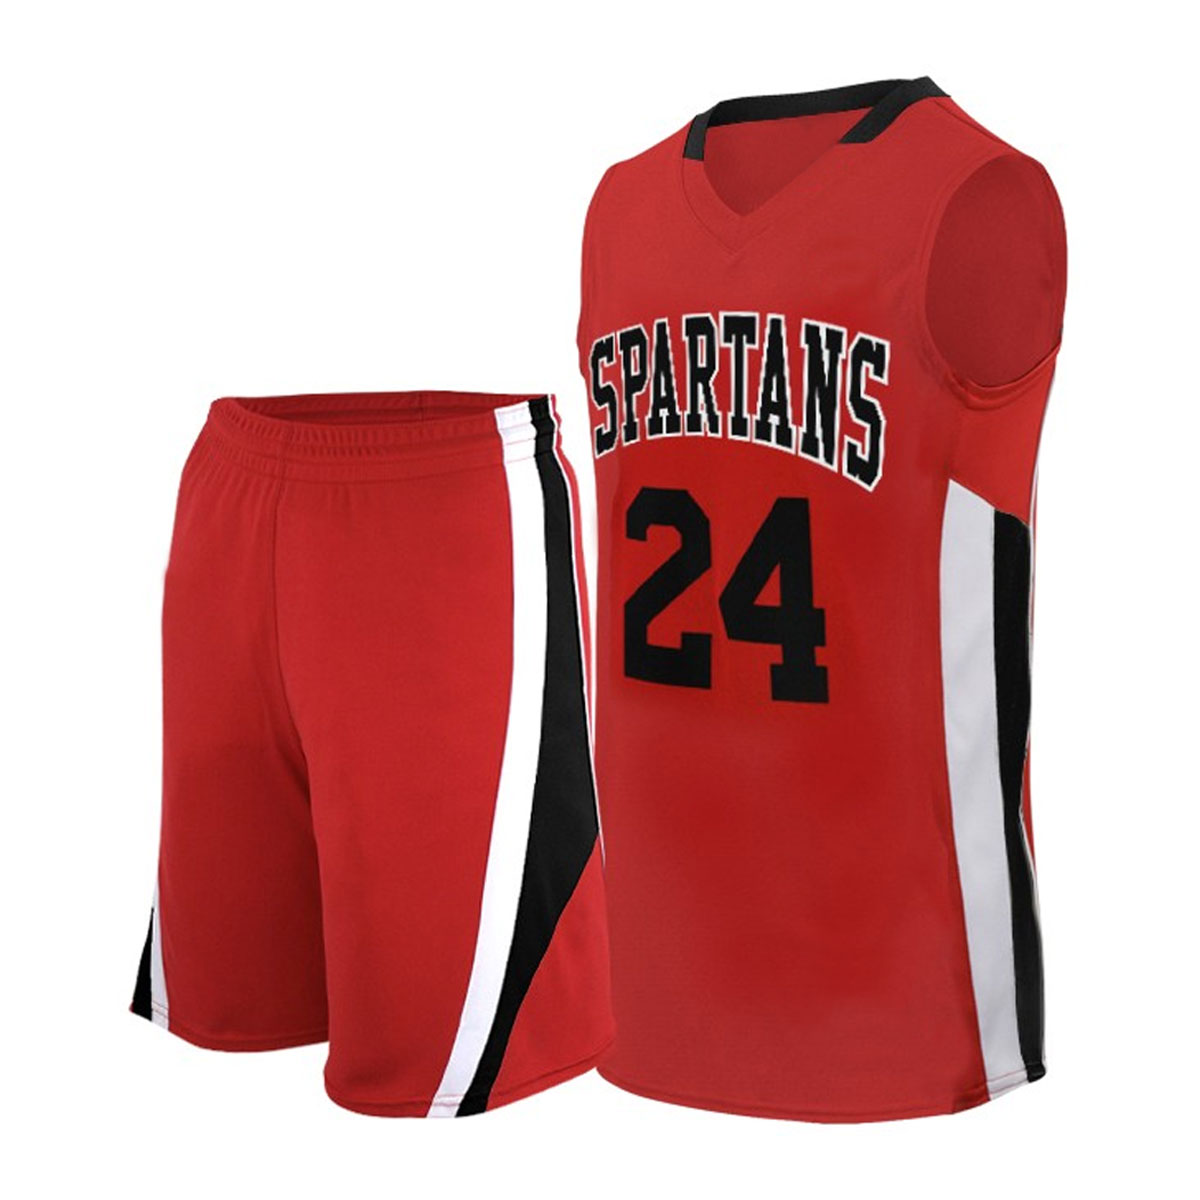 Durable and stylish basketball jerseys designed to enhance performance on the cour